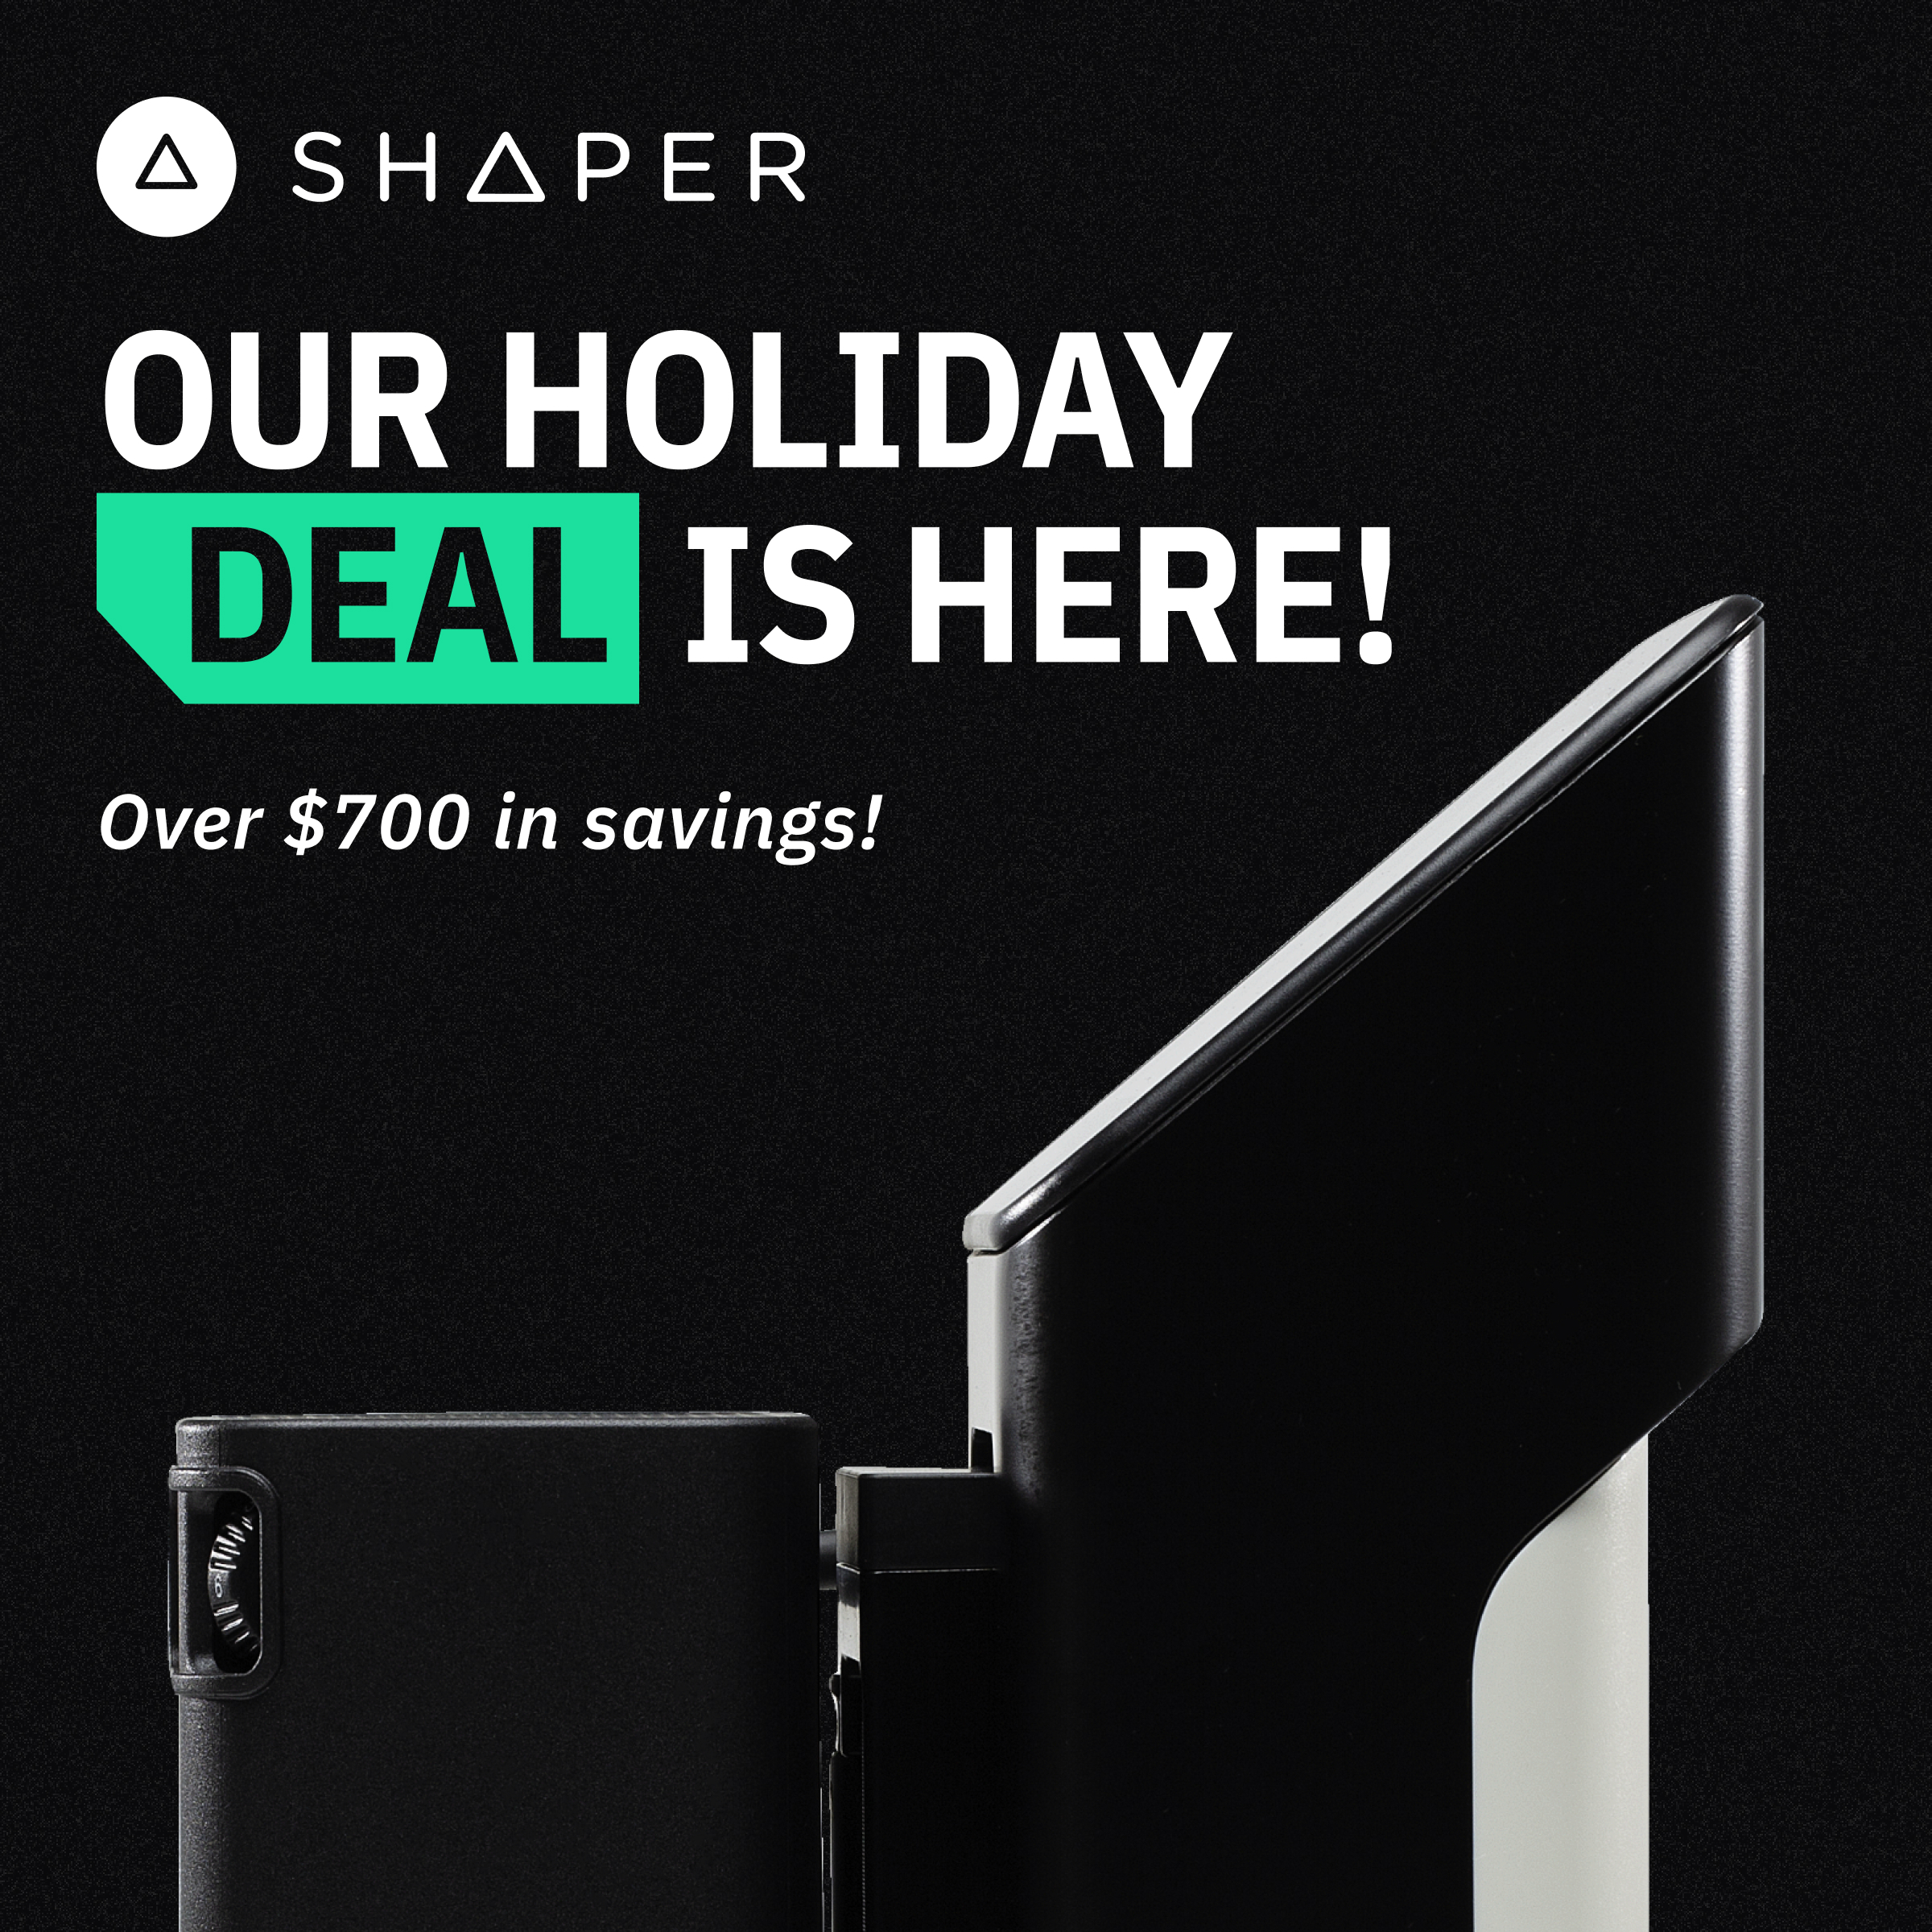 Shaper’s Holiday Deal 